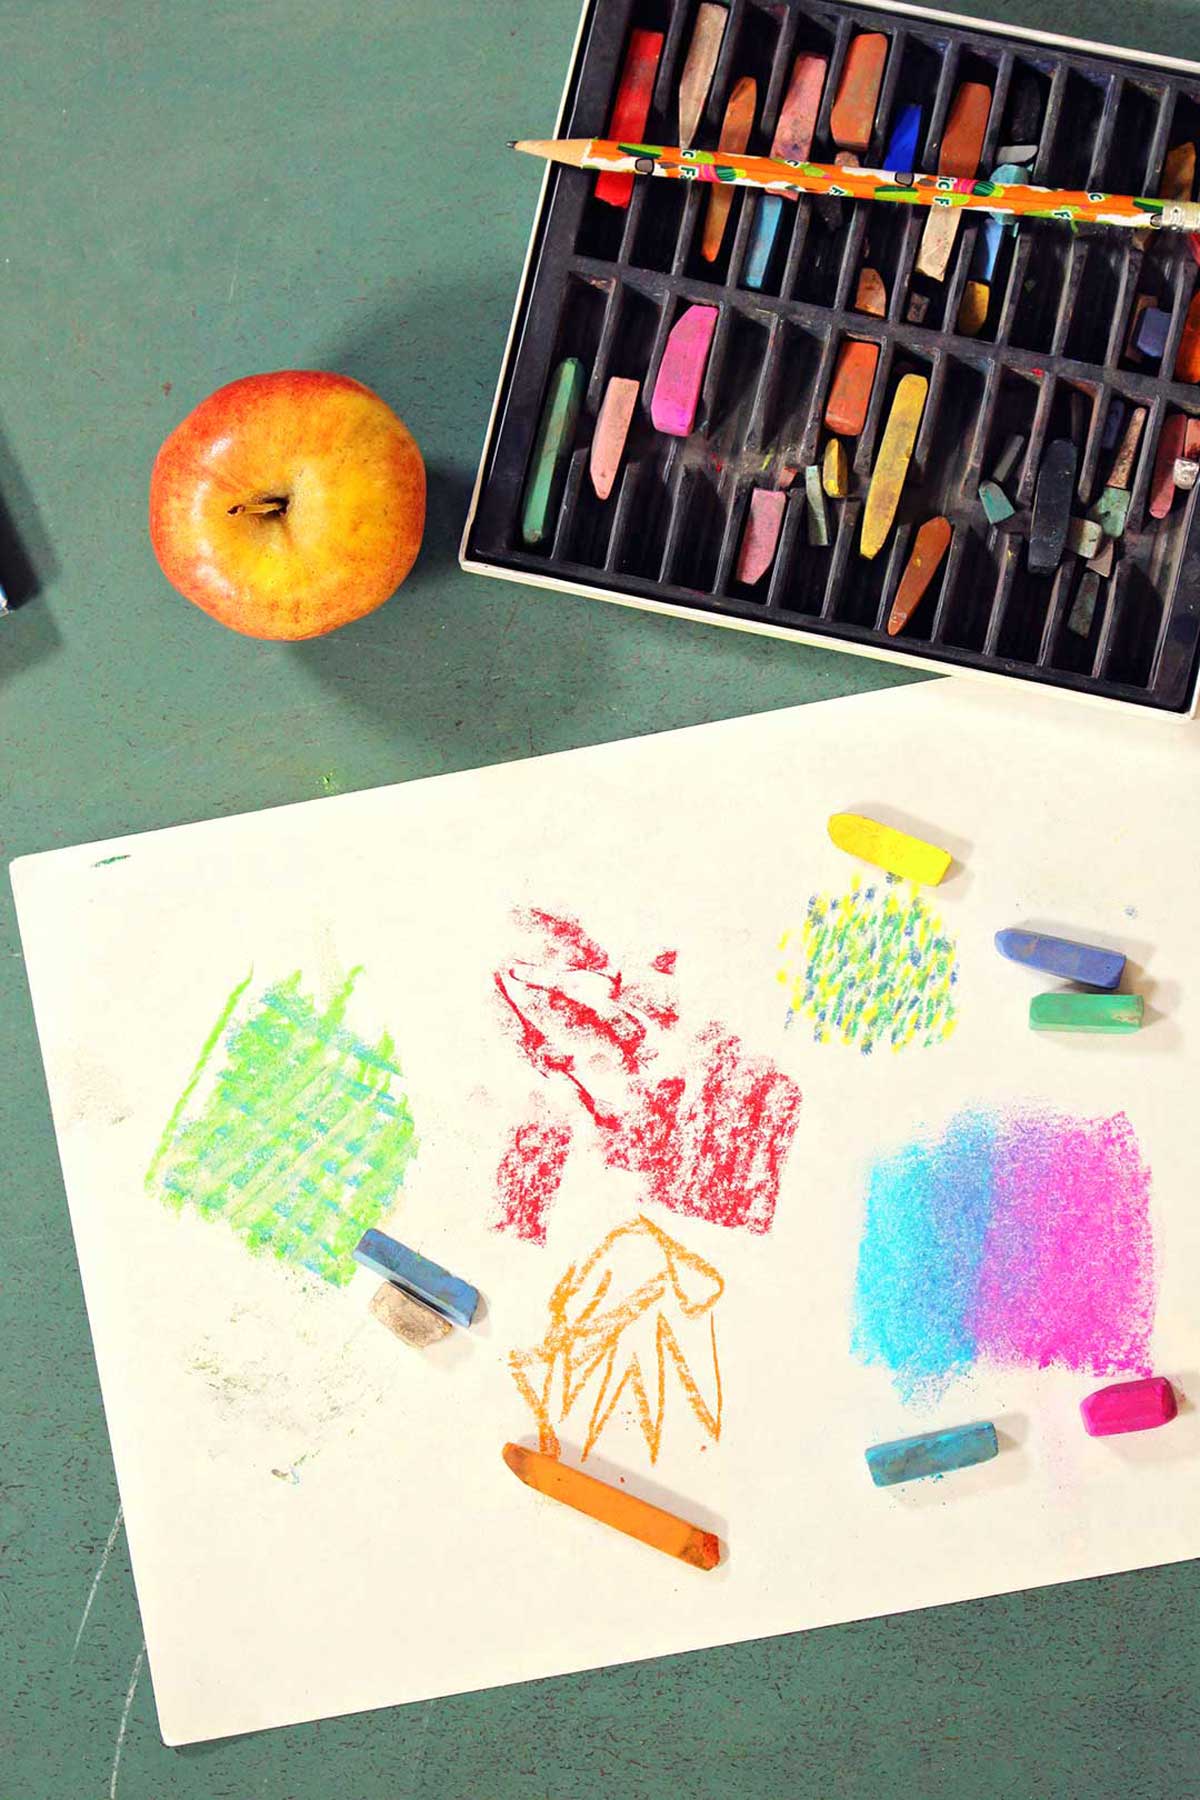 Doodles on a white piece of paper using pastels with tray of pastels and apple next to it.